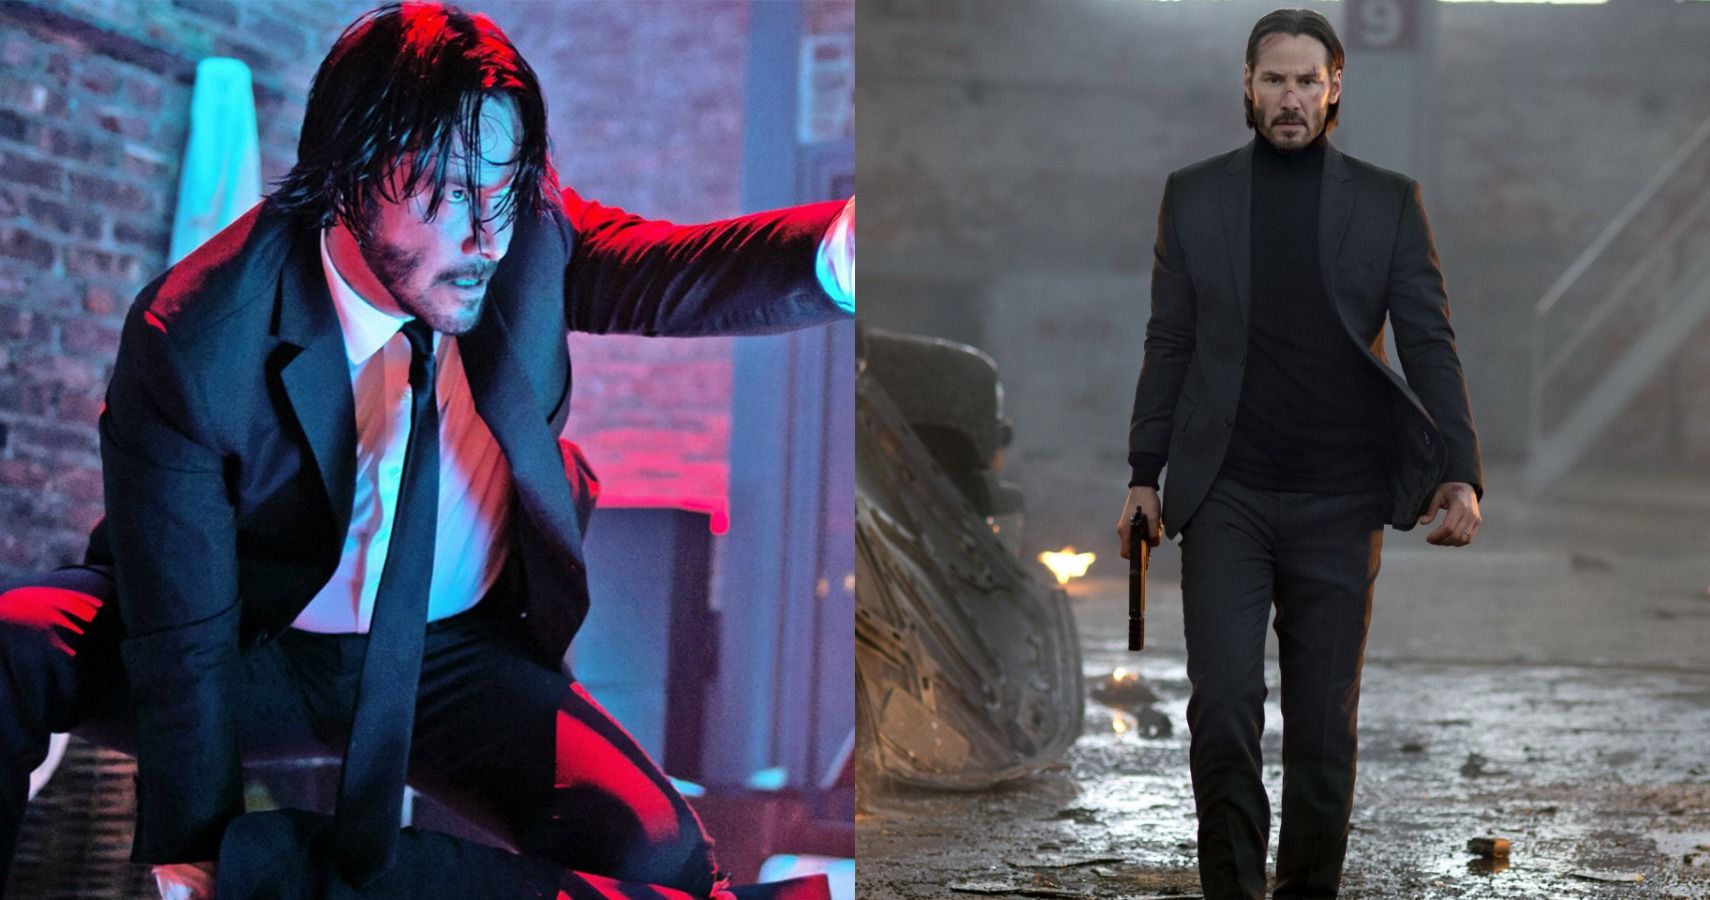 John Wick: 10 Things You Didn’t Know About Keanu Reeves’ Performance